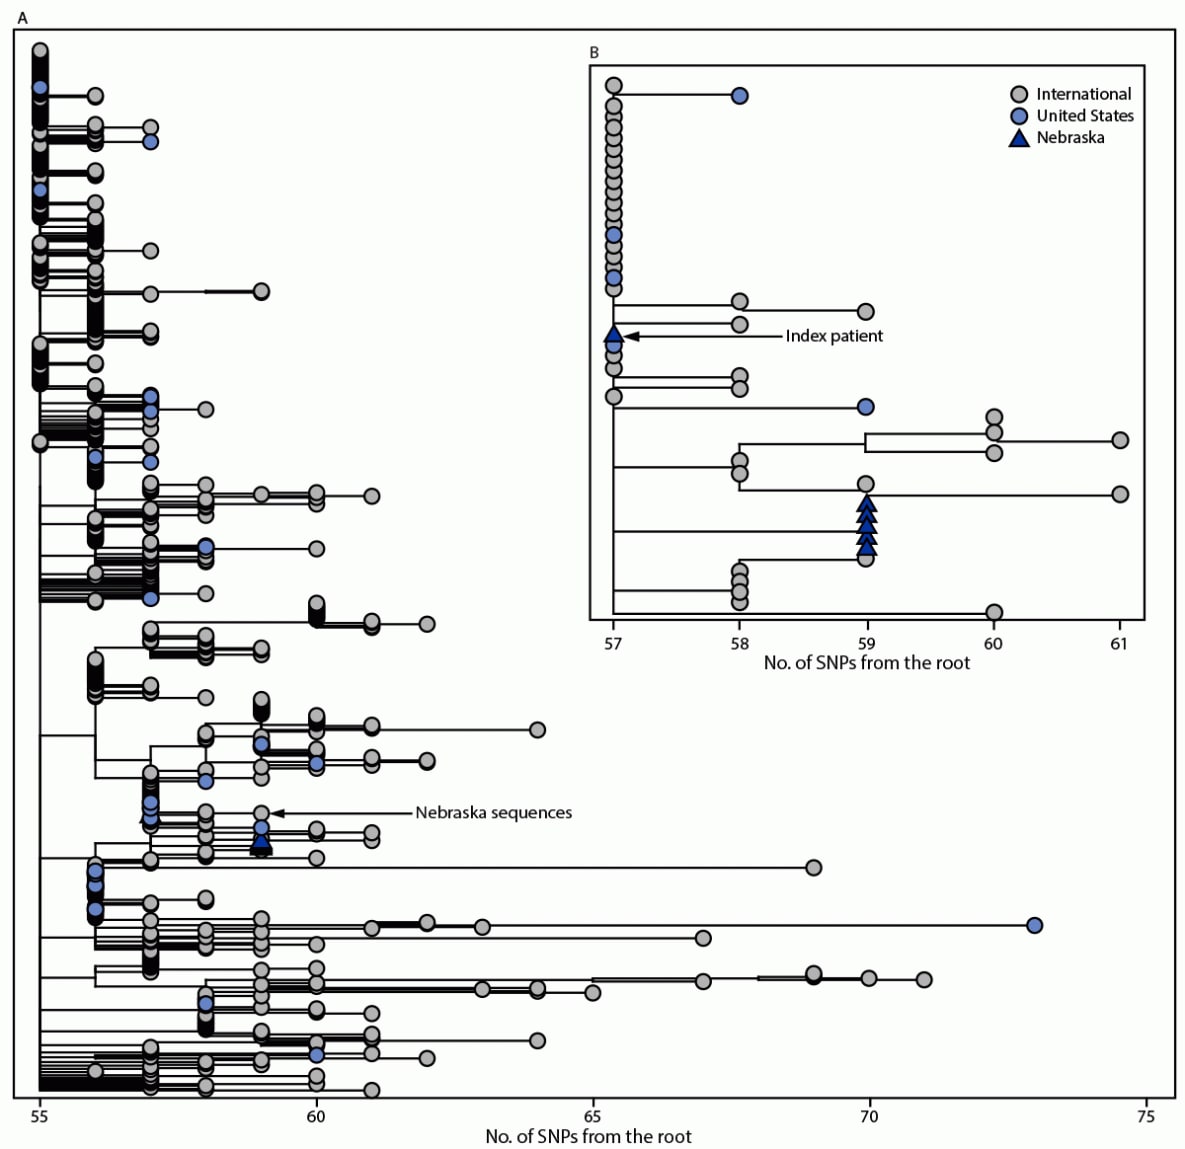 The figure is a two-part phylogenetic tree. Panel A illustrates the global phylogeny of Omicron samples available on Global Initiative on Sharing All Influenza Data as of December 6, 2021 (650 total genomes). Panel B illustrates an expanded view of Omicron sequences collected in Nebraska from November–December 2021.